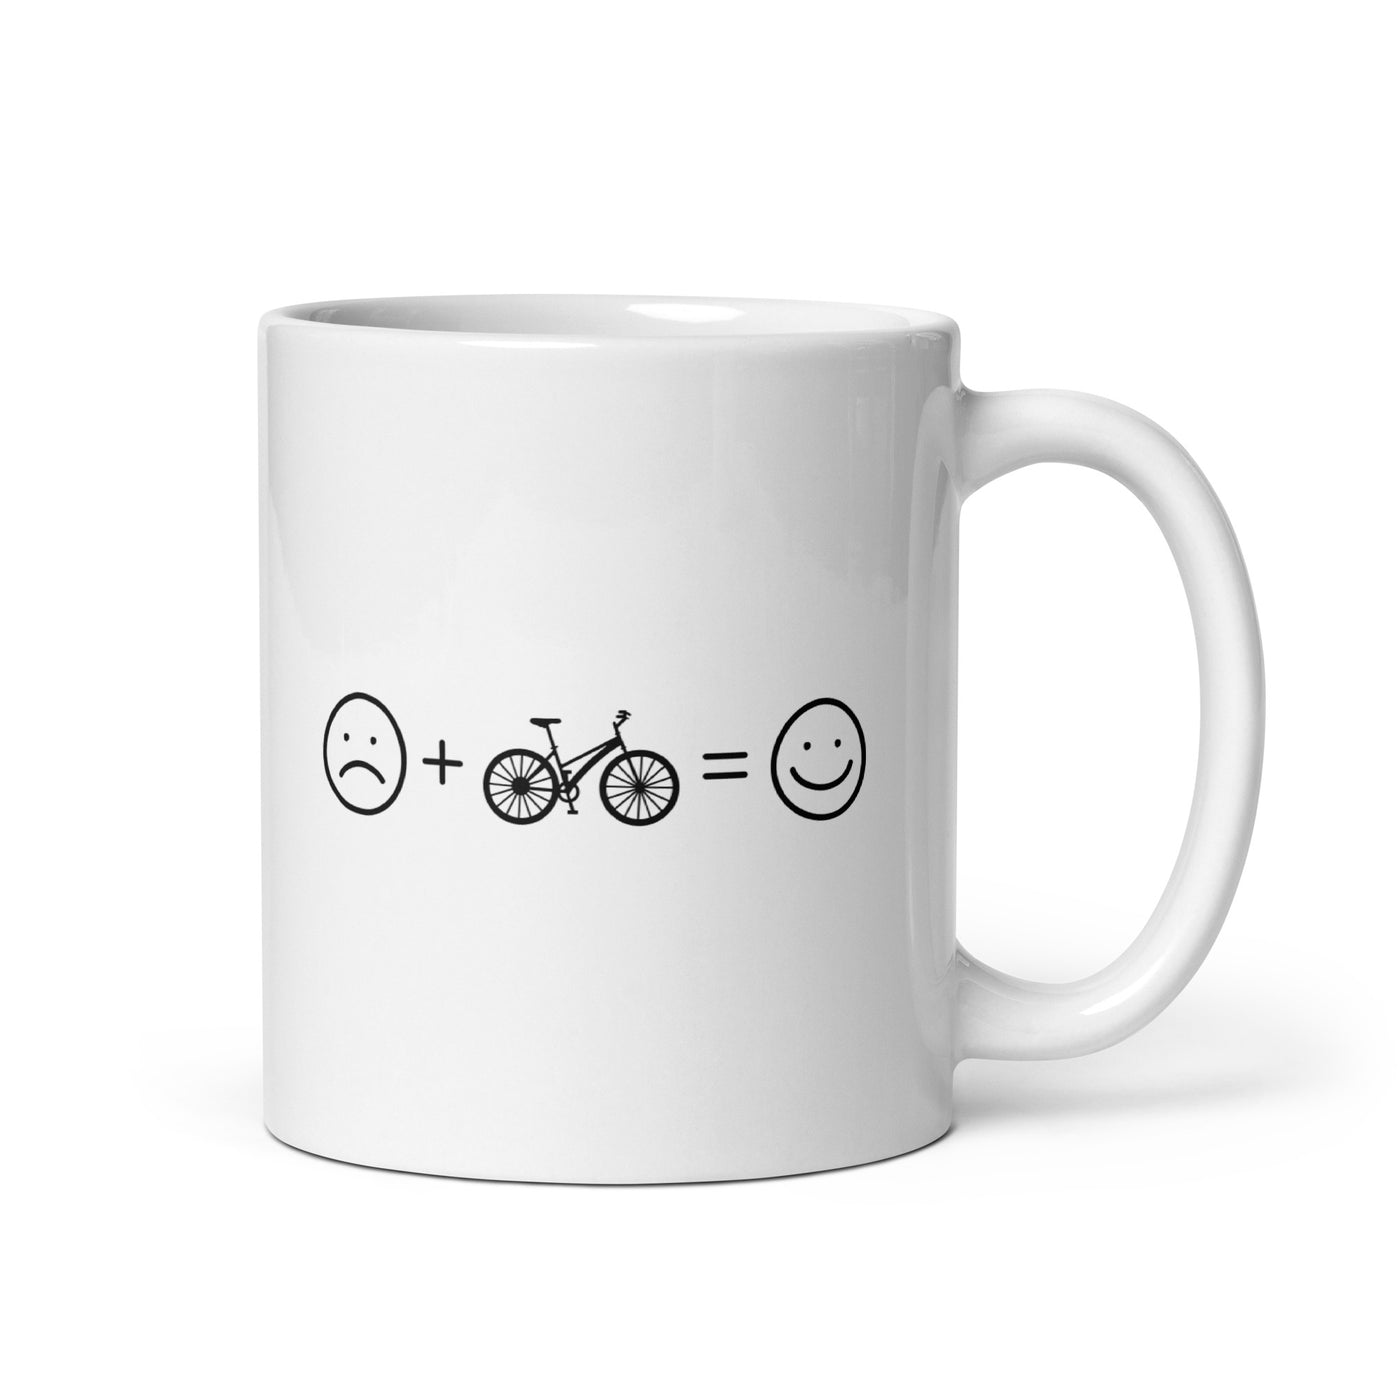 Smile Face And Bicycle - Tasse fahrrad